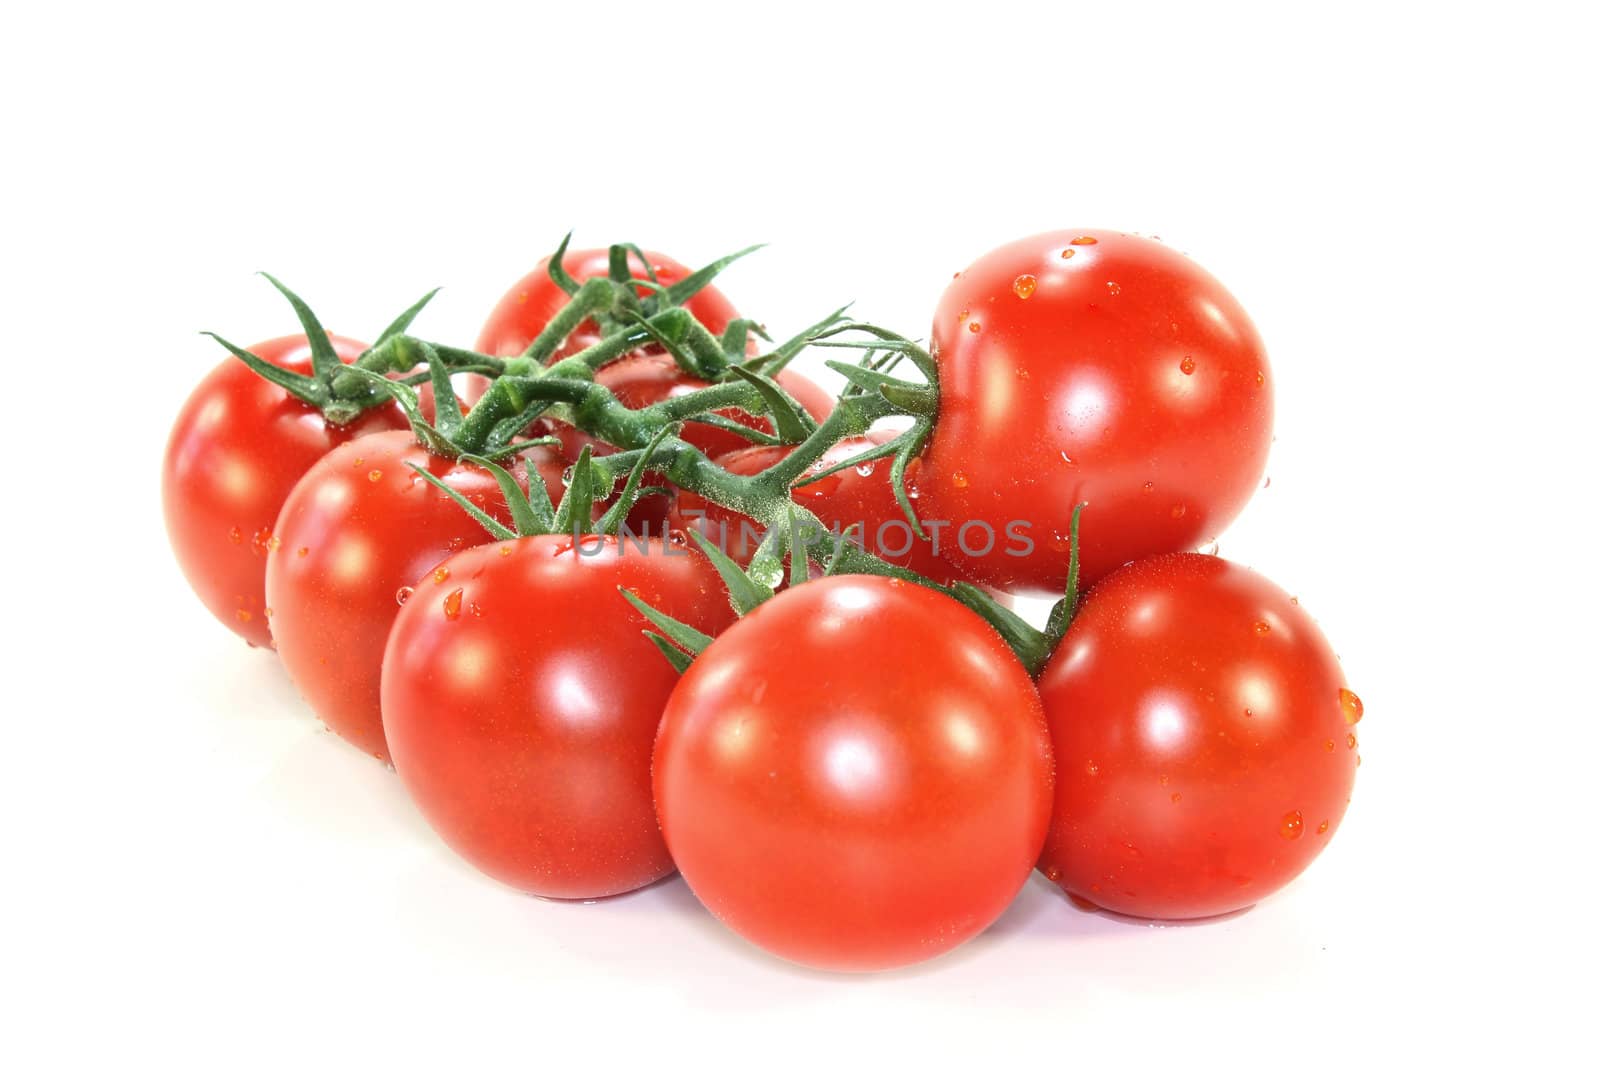 Tomatoes by silencefoto